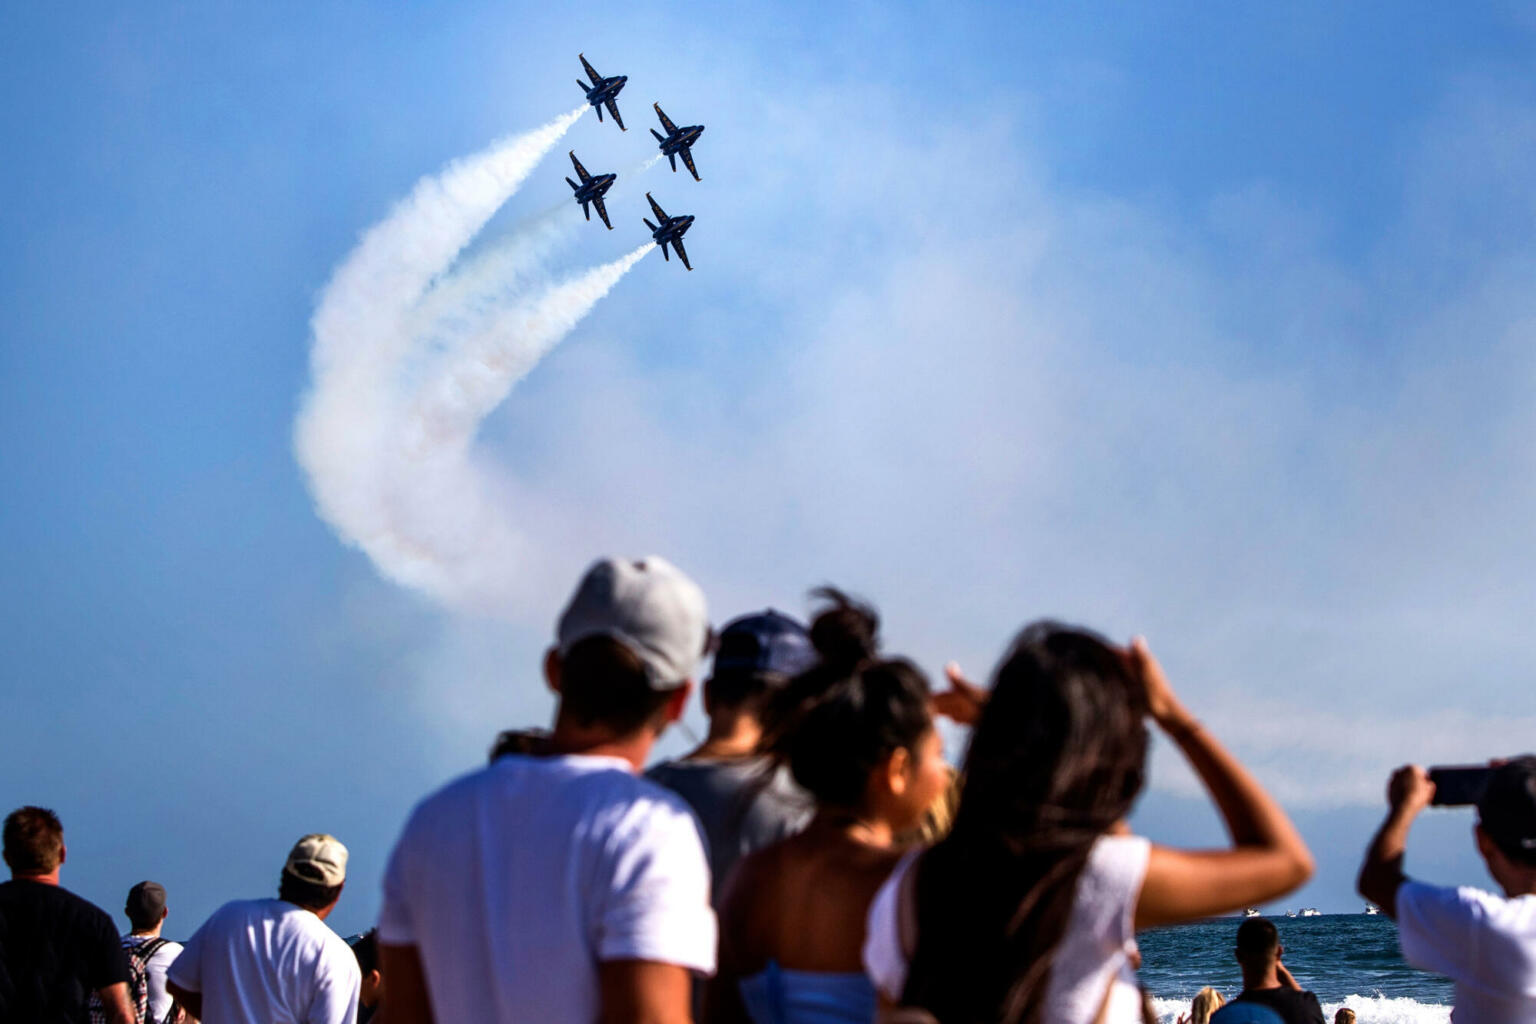 Pacific Airshow brings it's event to the Gold Coast Inside Gold Coast